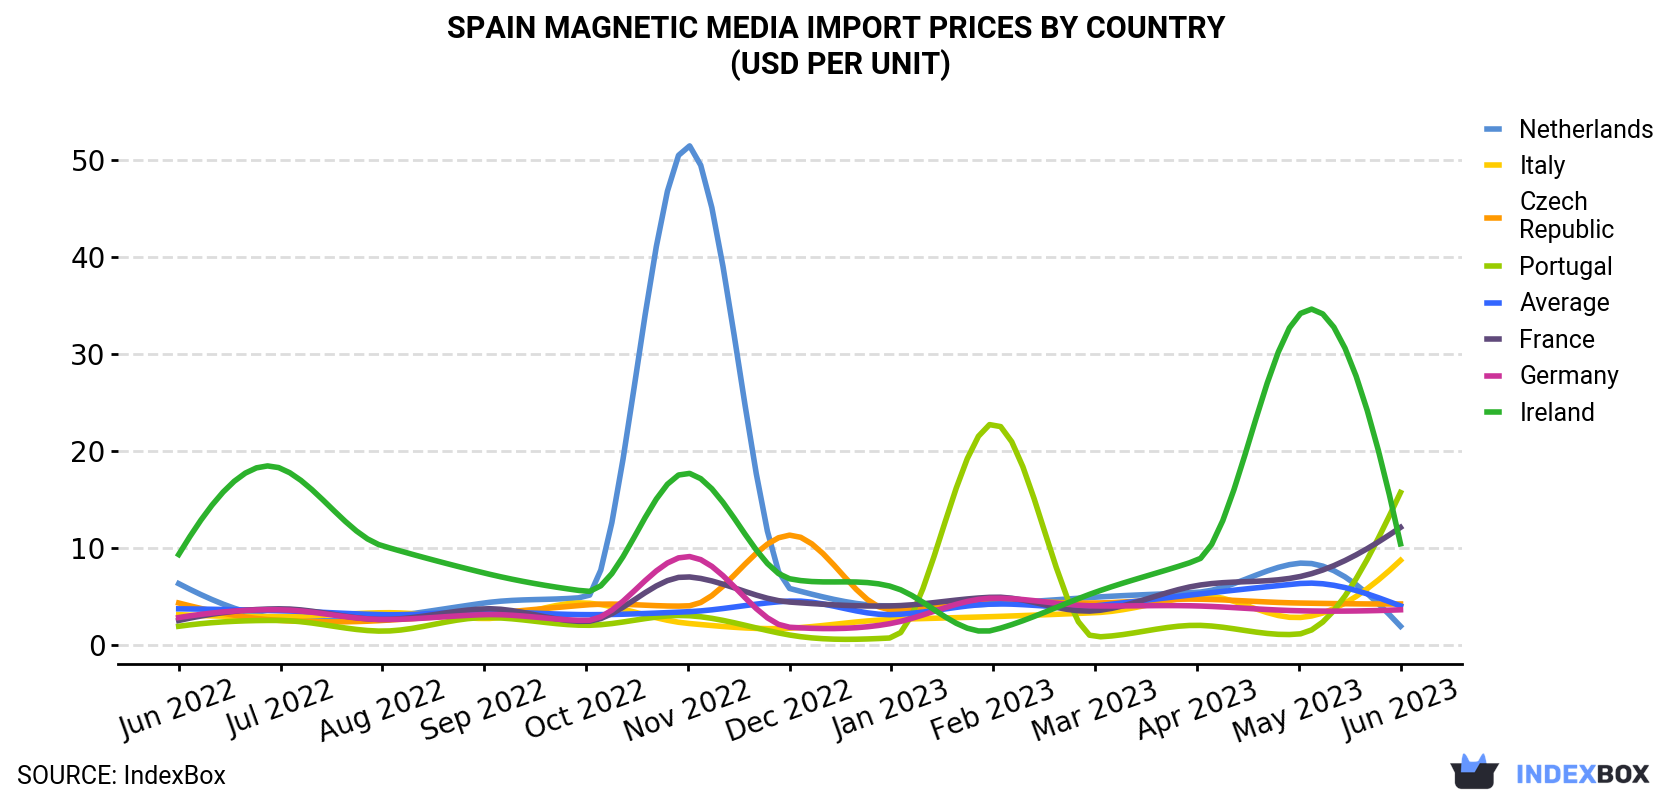 Spain Magnetic Media Import Prices By Country (USD Per Unit)